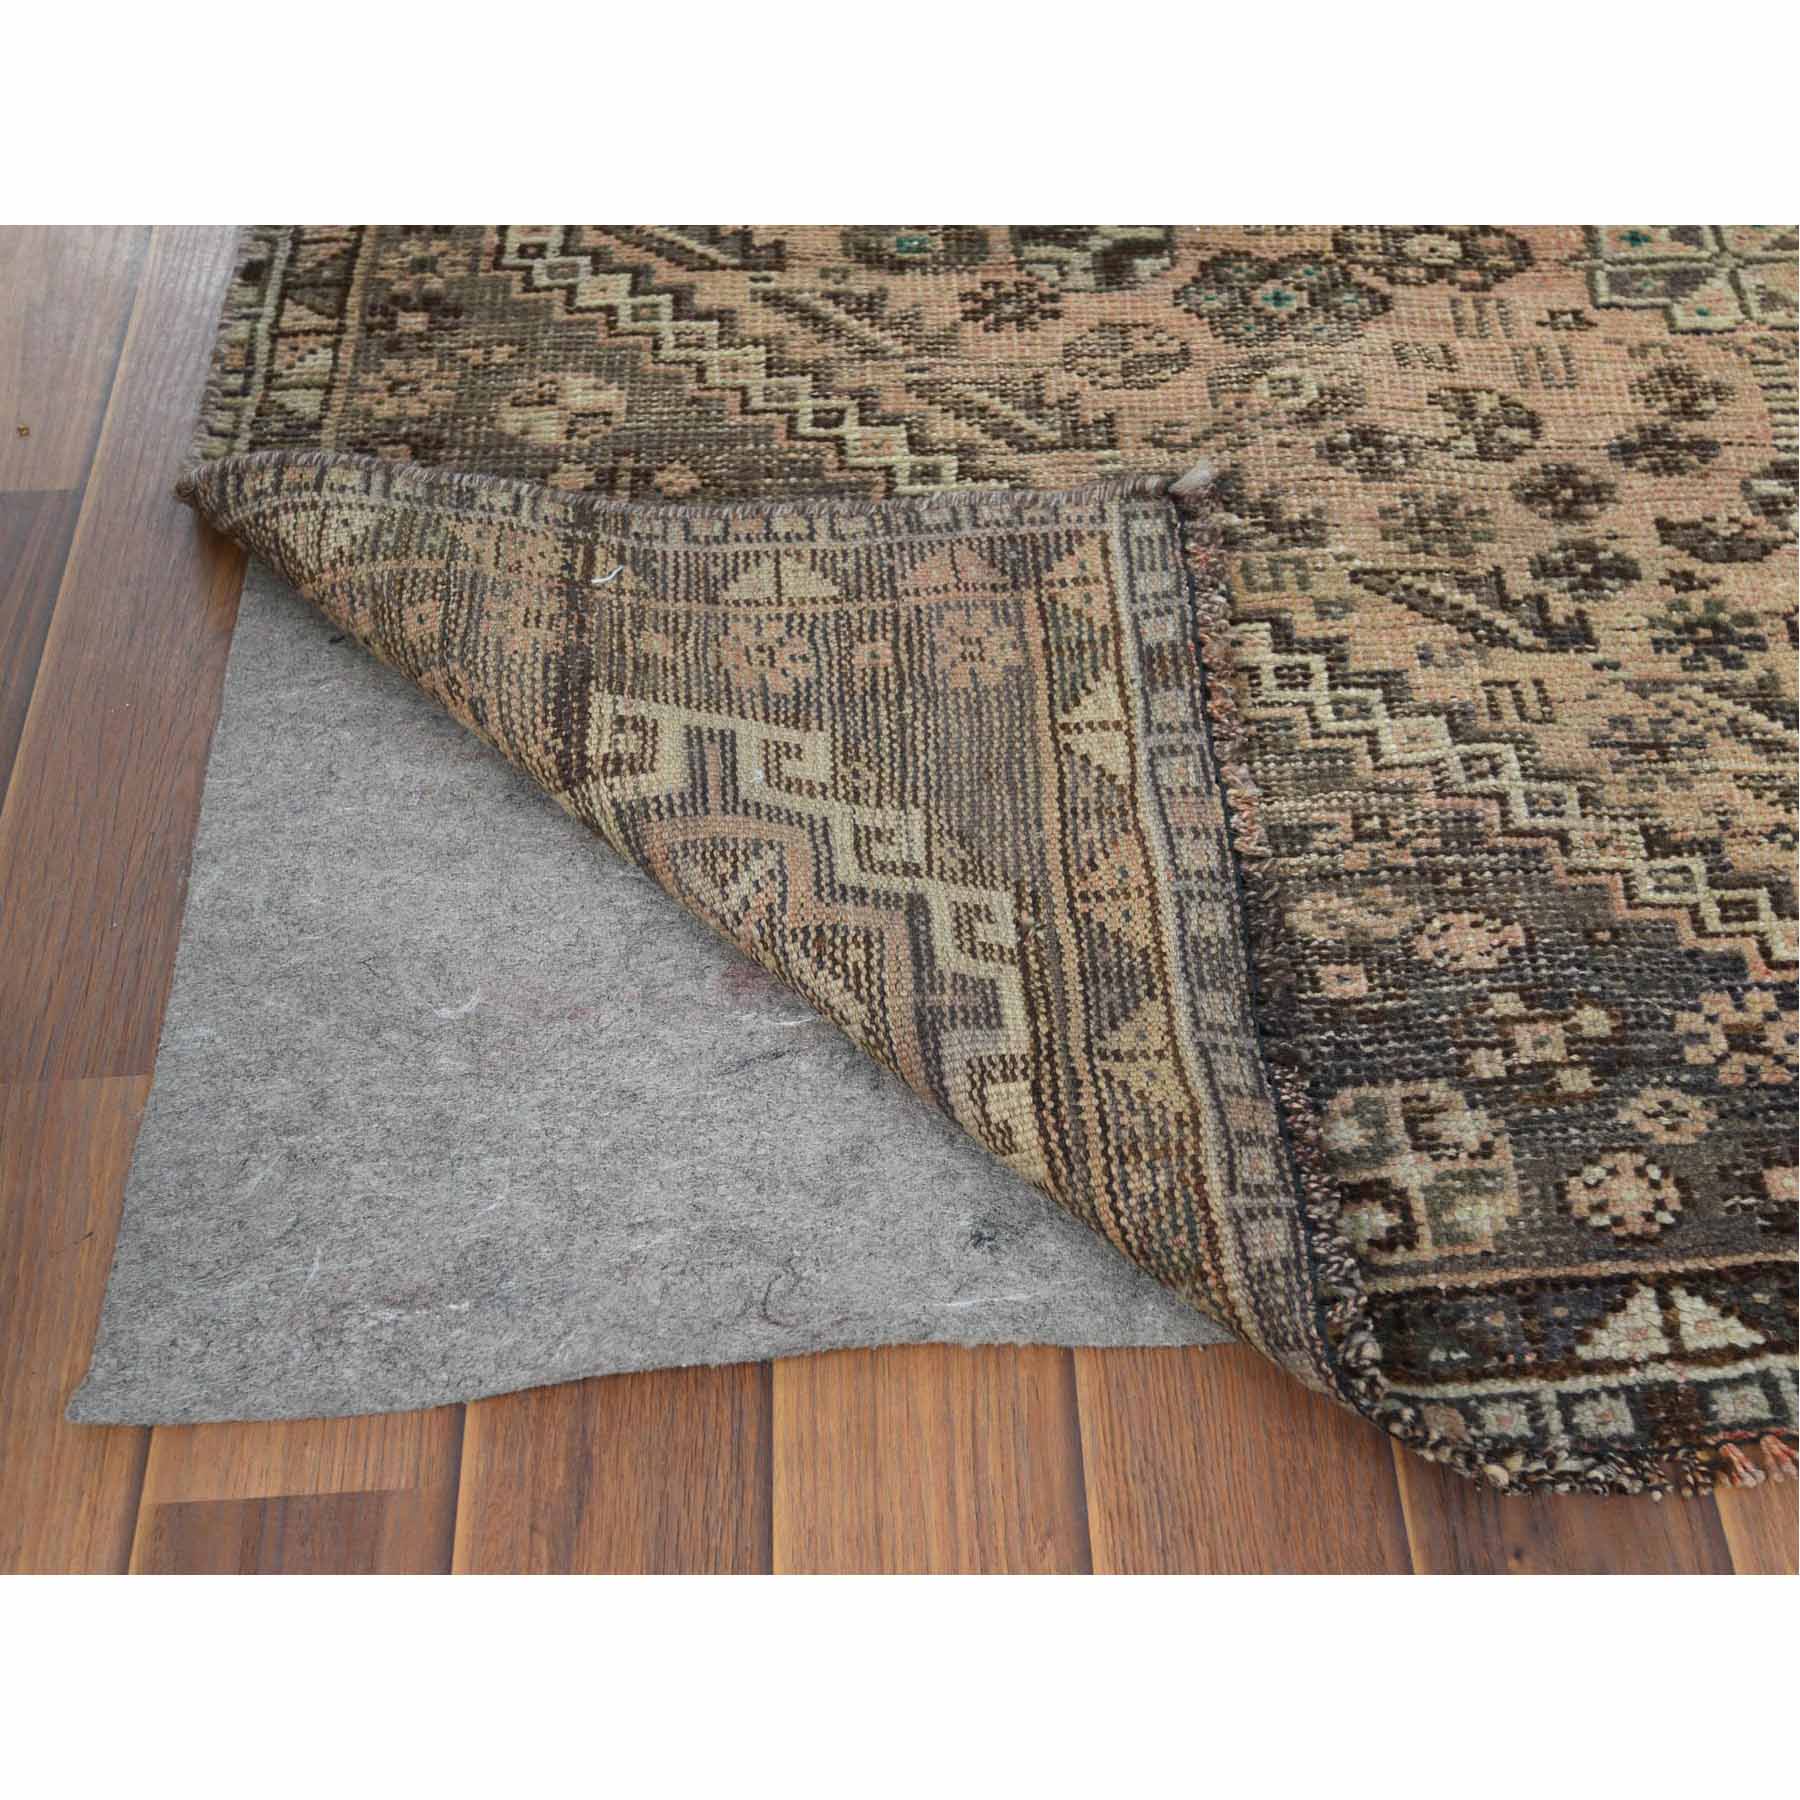 Overdyed-Vintage-Hand-Knotted-Rug-302755